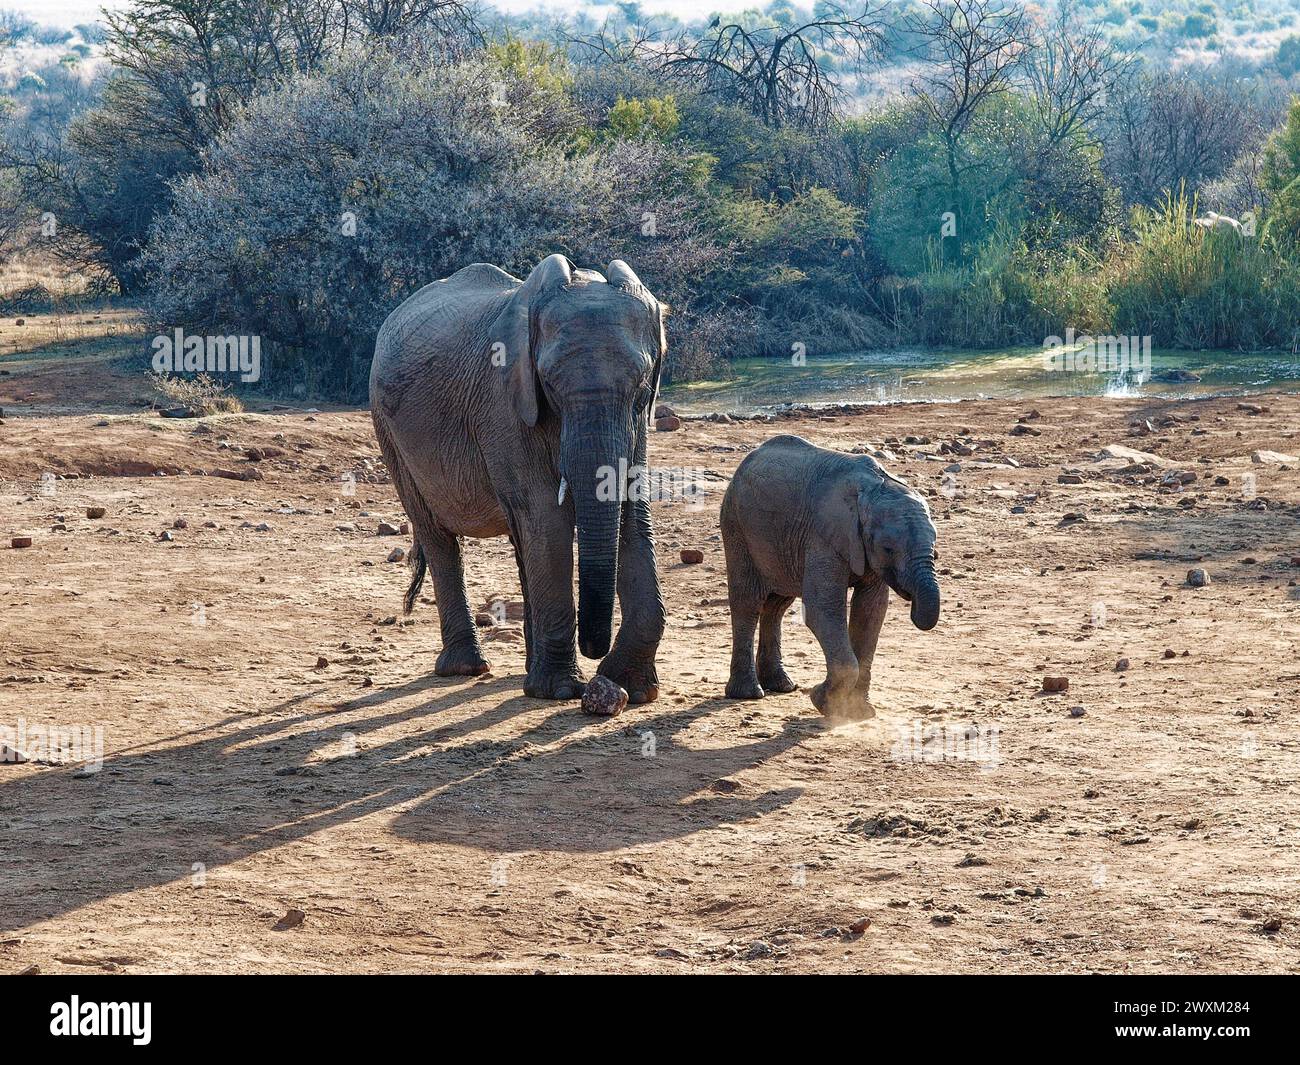 Elephants in the South African Bush - Mother elephant walking with baby elephant in front. Dry, brown ground. Stock Photo